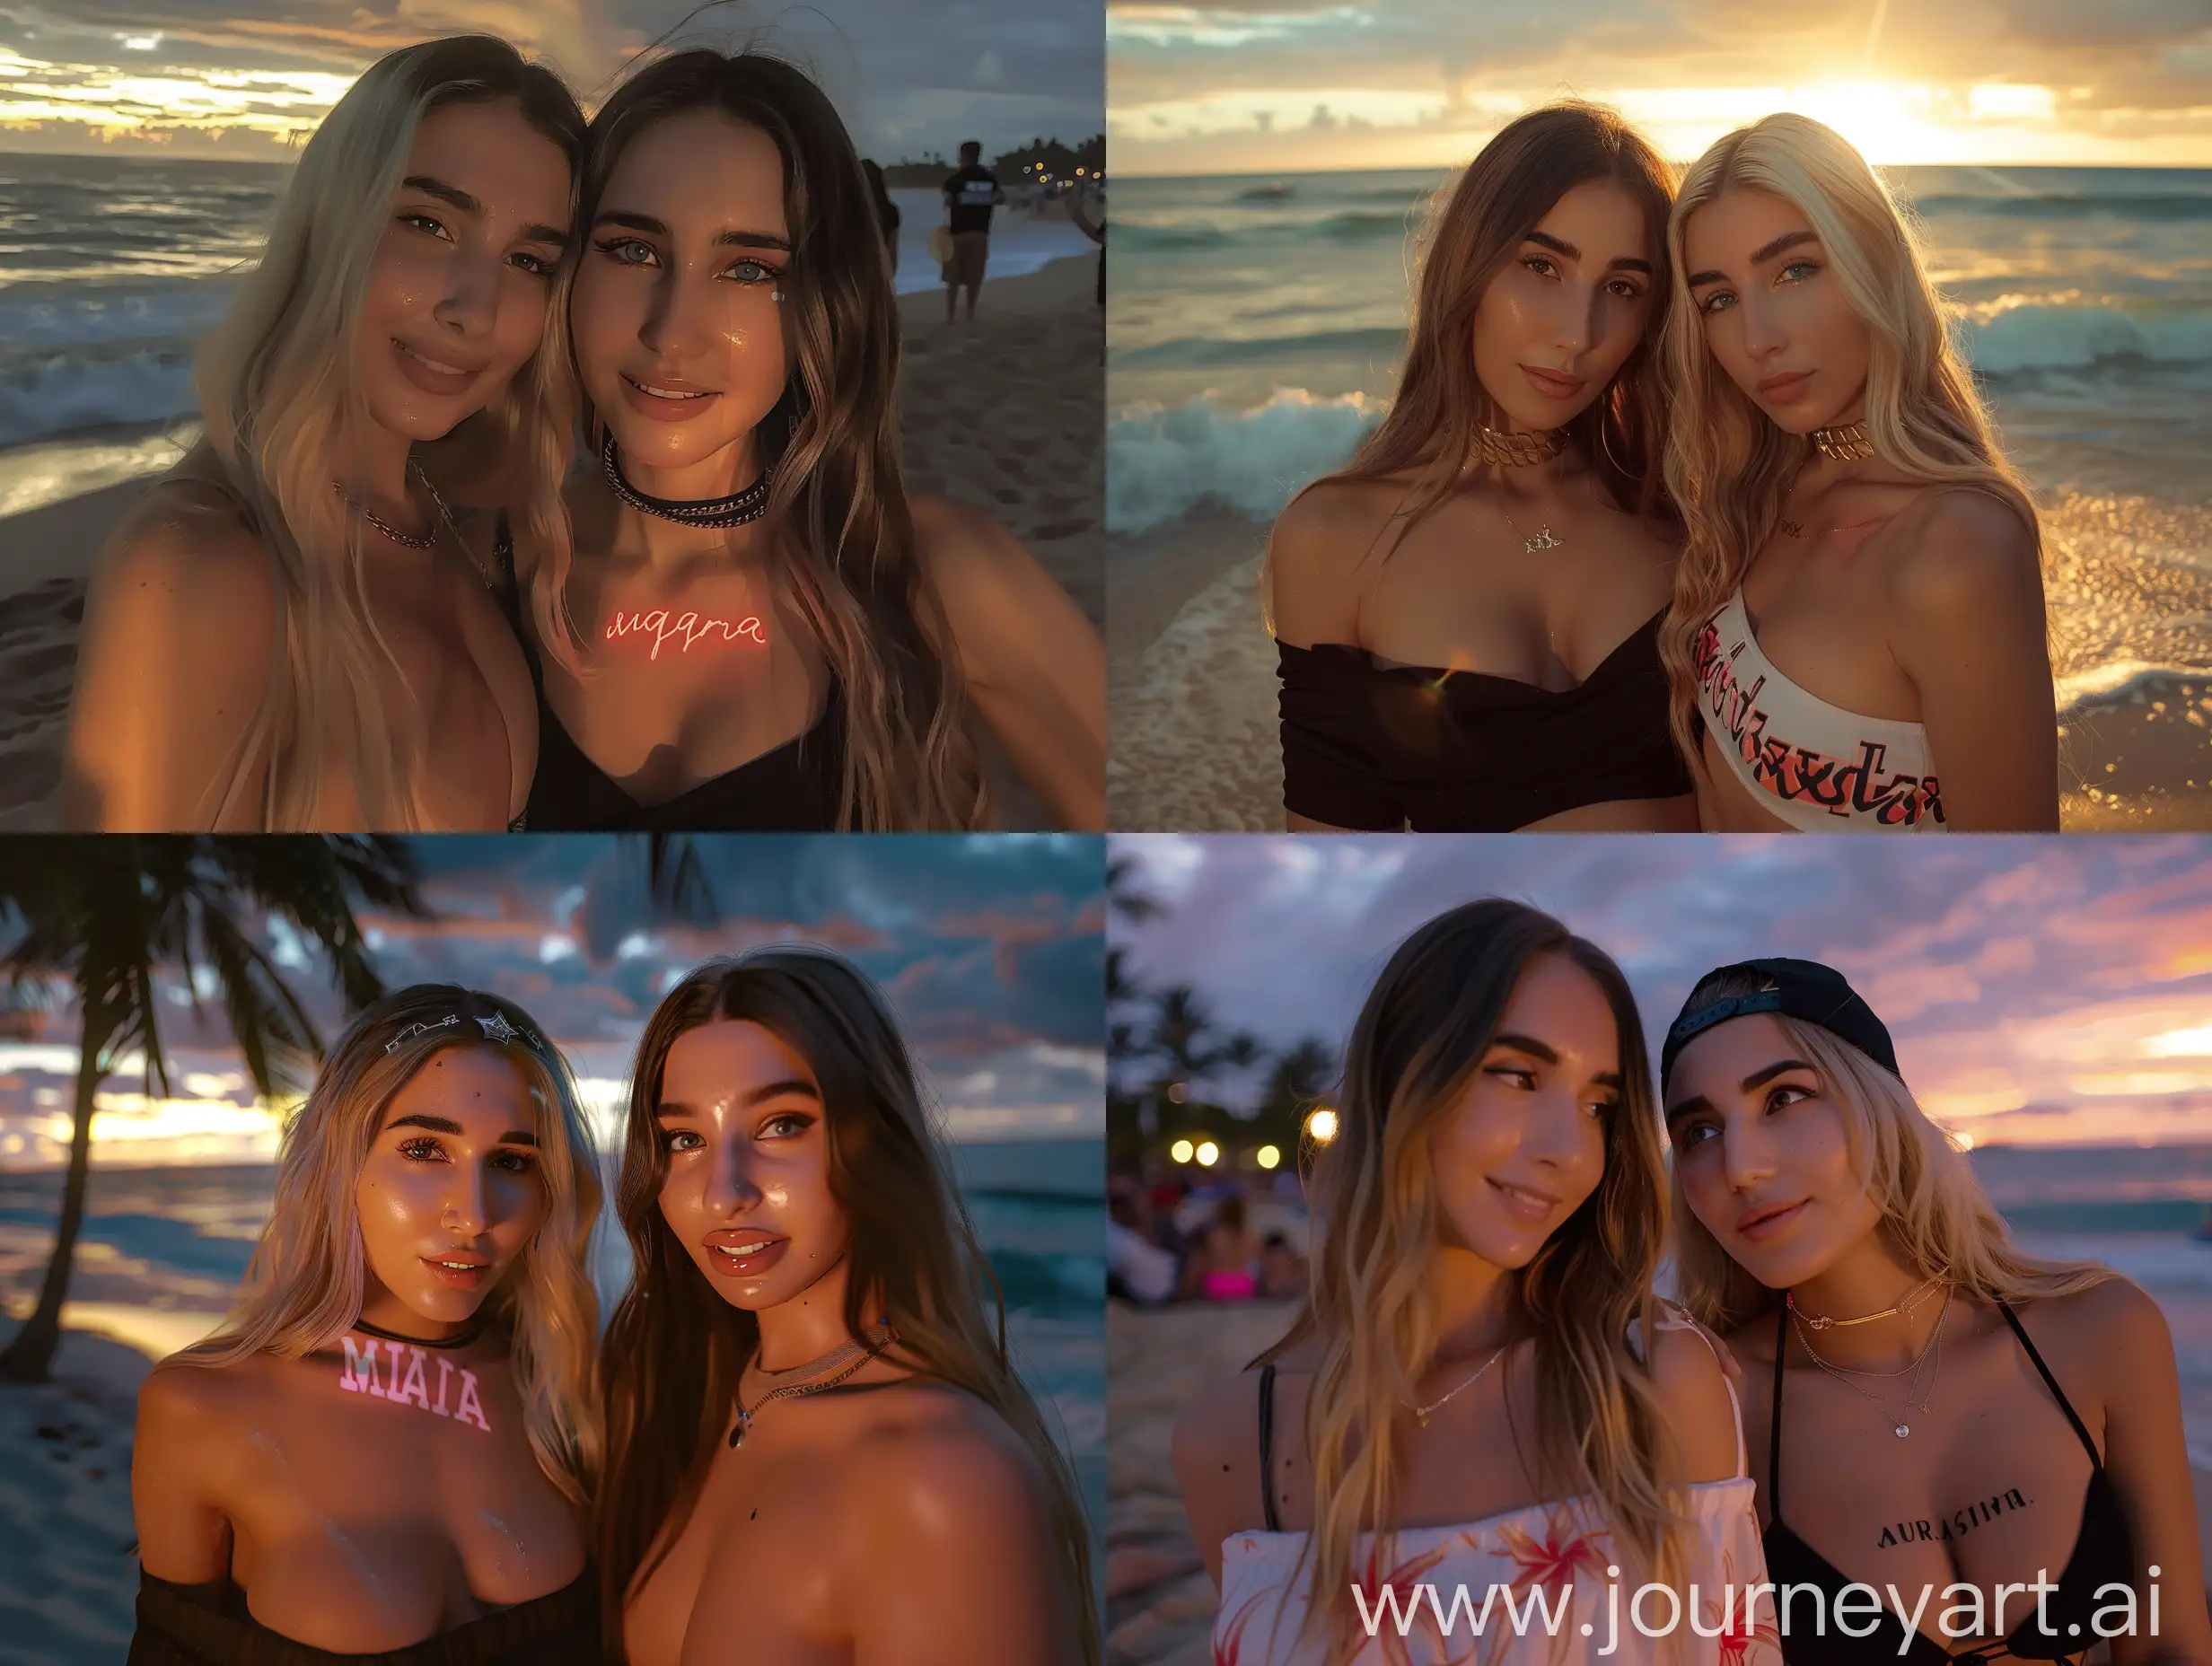 Aesthetic instagram of two girls at the beach on a date, realistic lighting, super models, chest